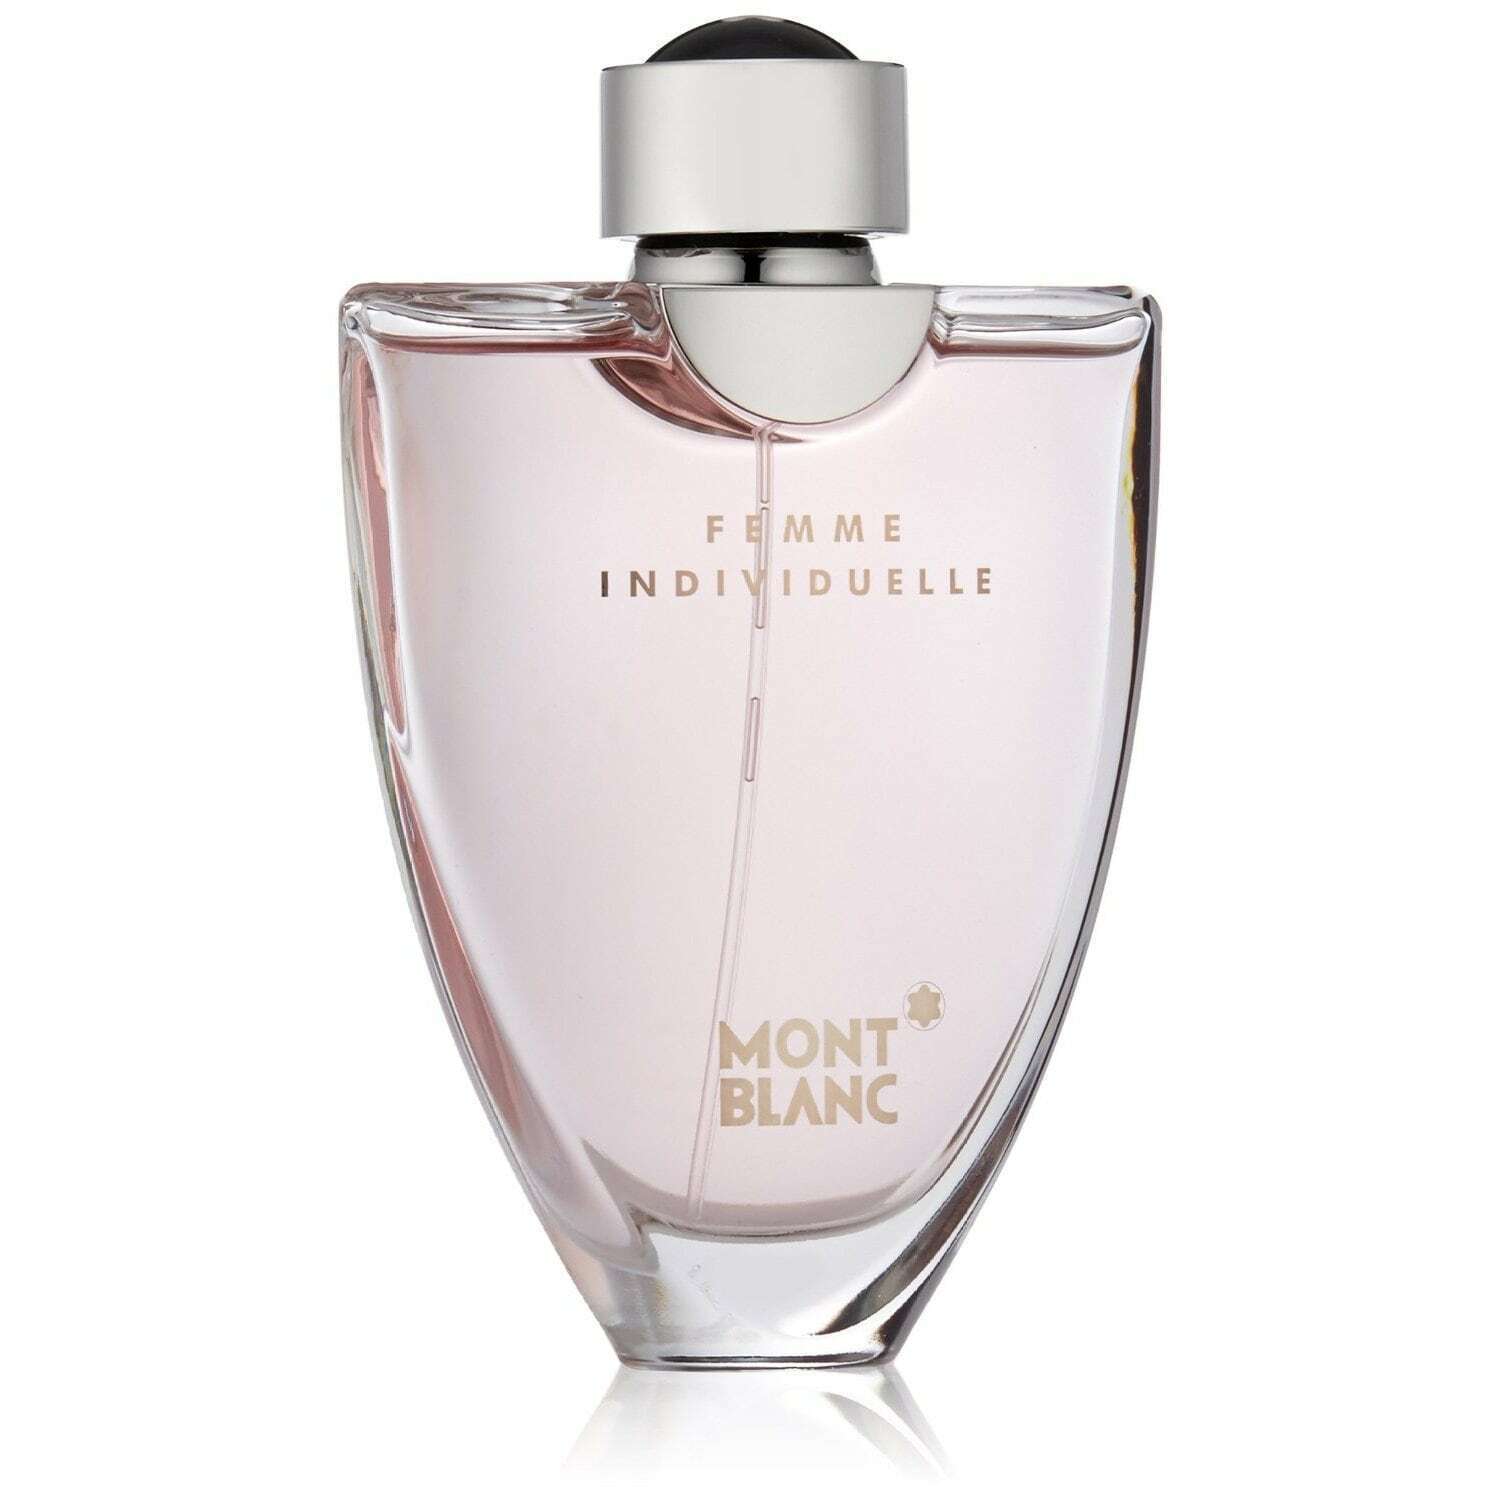  FEMME INDIVIDUELLE by Mont Blanc for Women 2.5 oz edt Spray New in Box